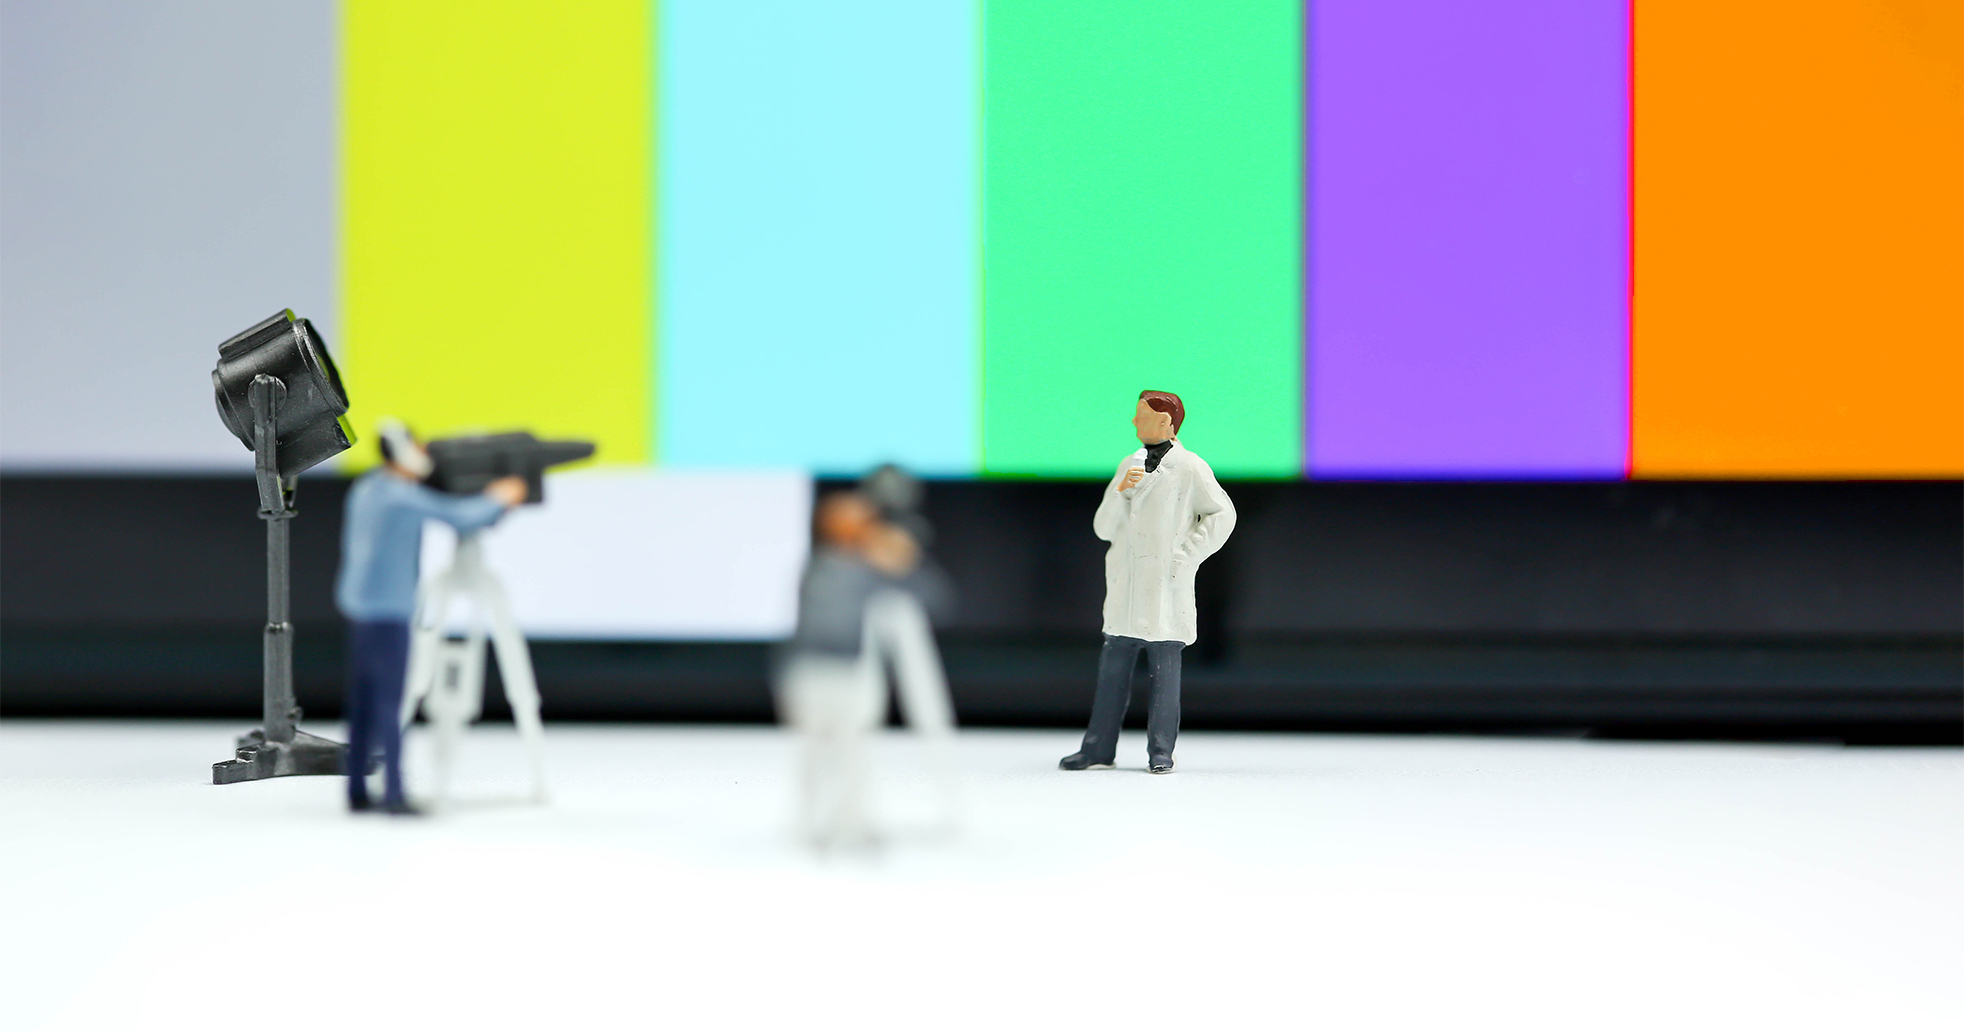 An effective video marketing strategy can help businesses promote their brand